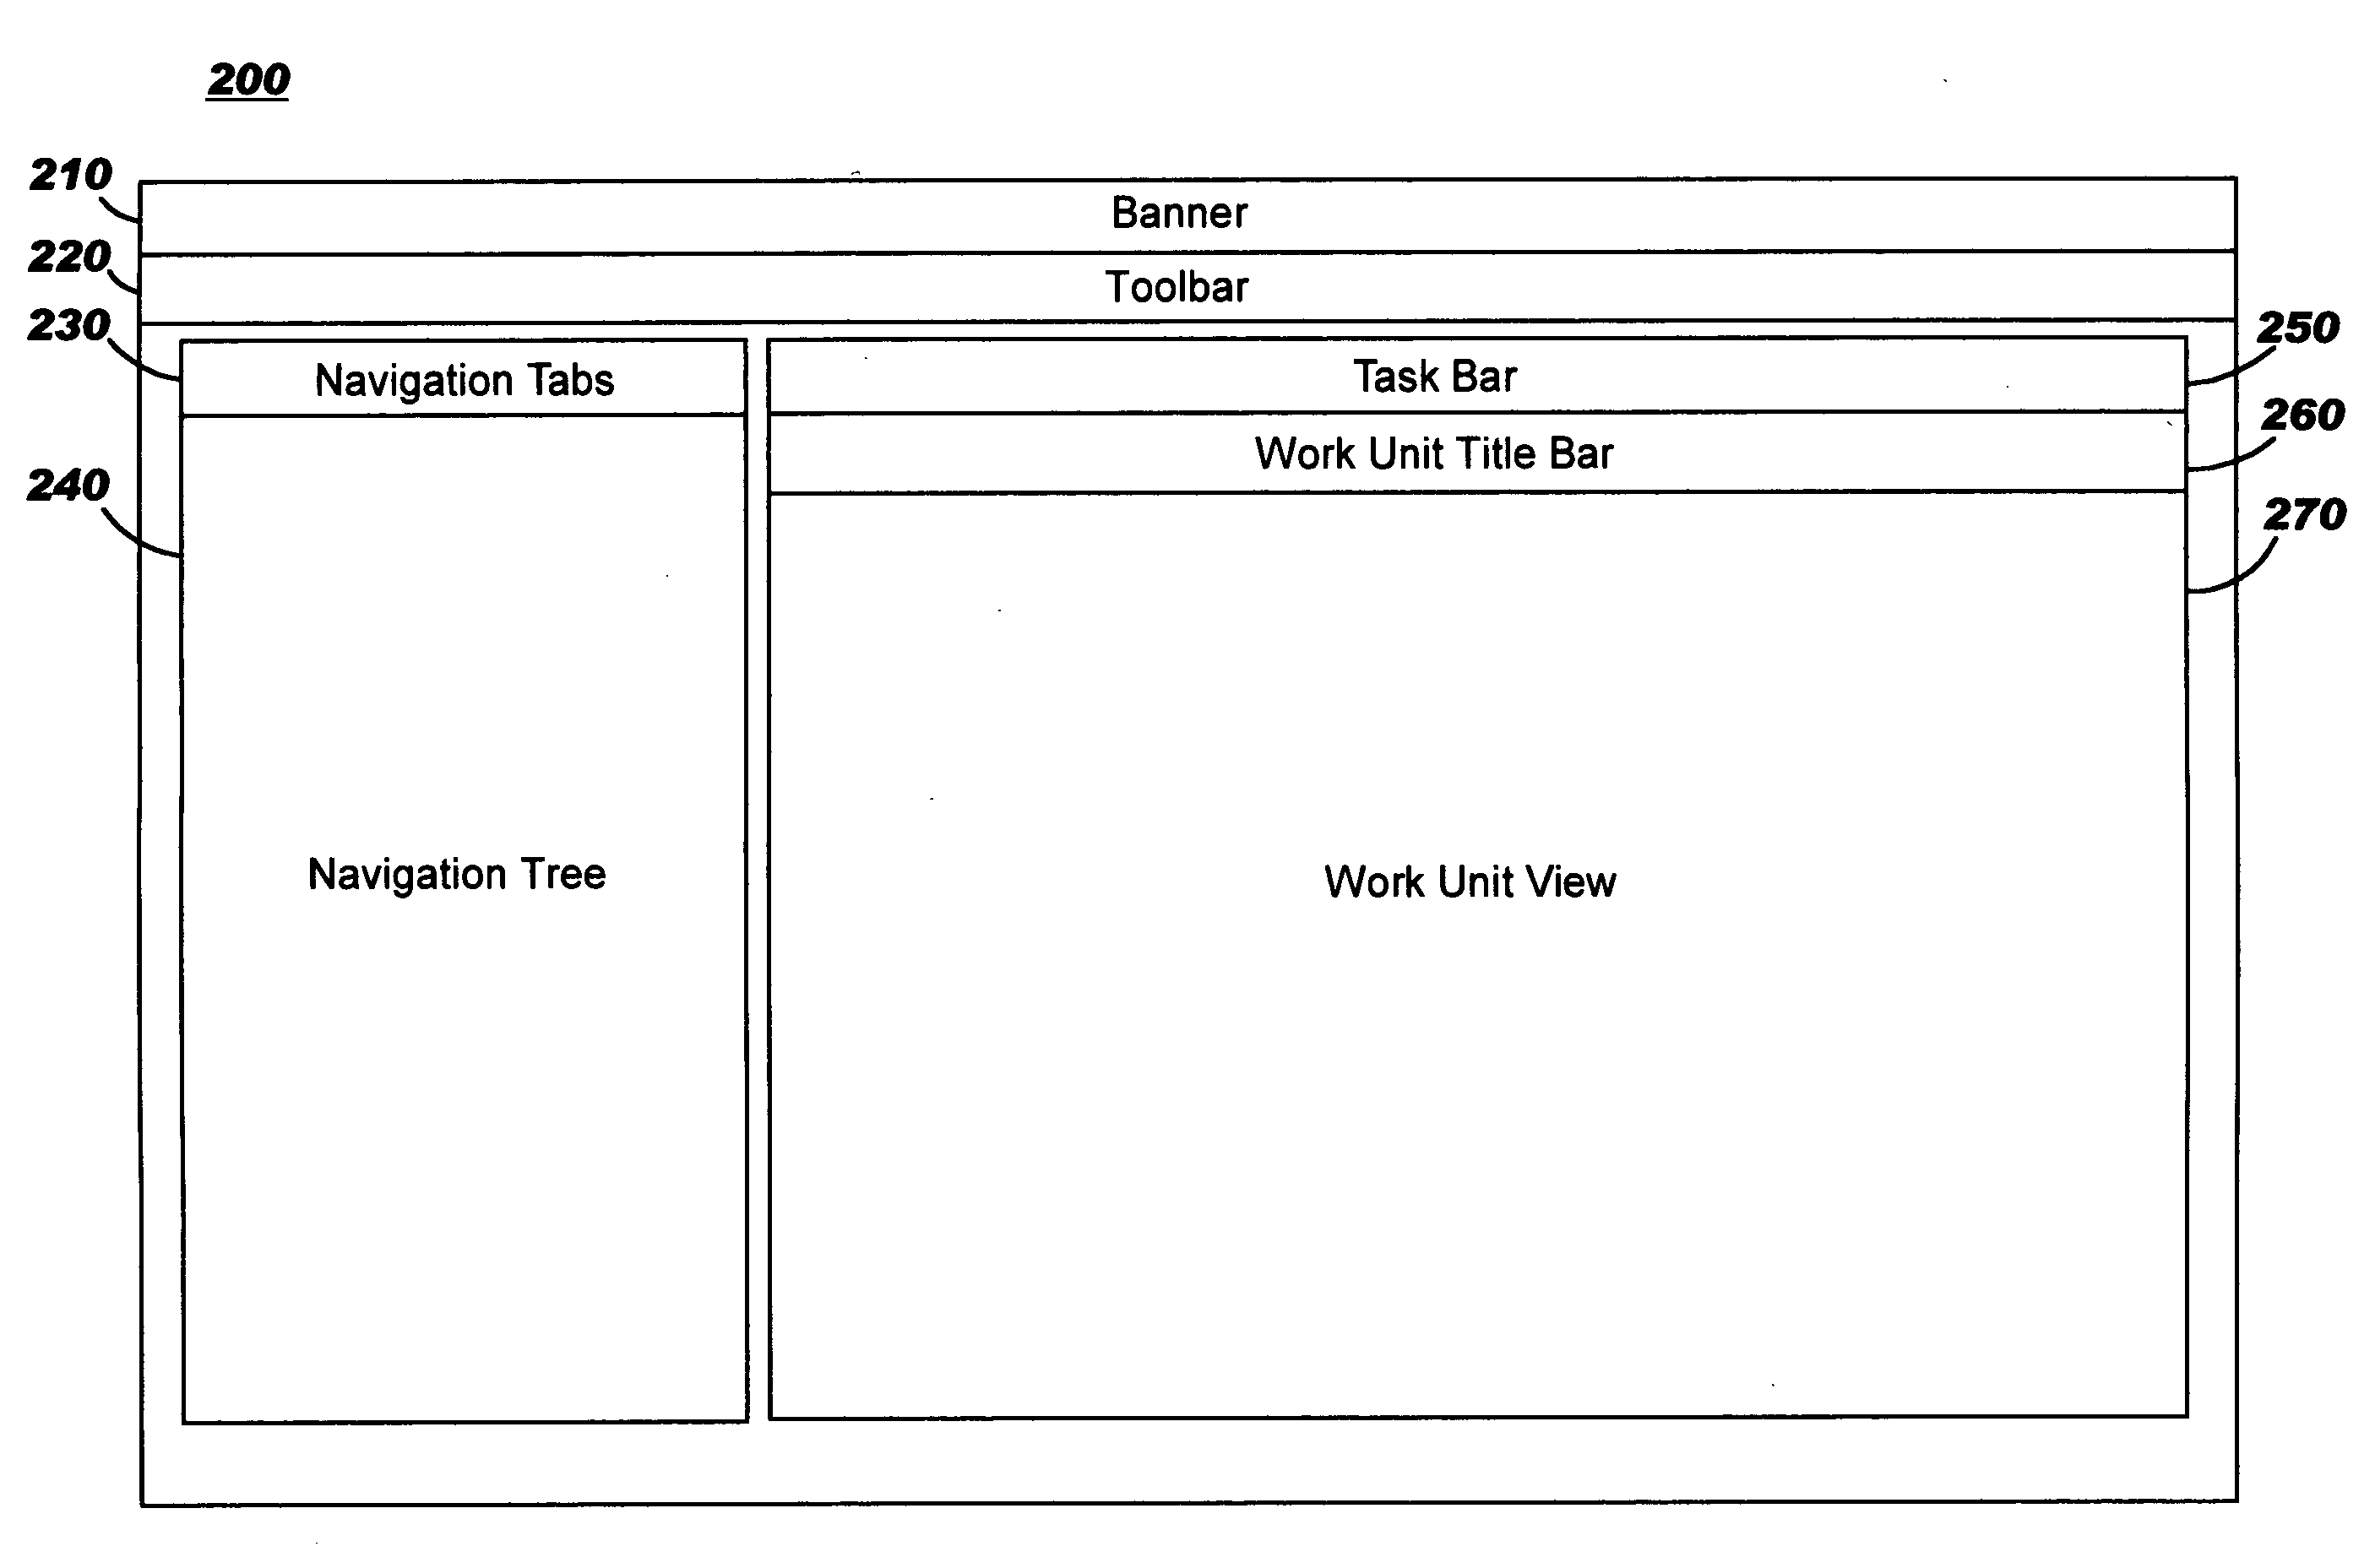 User task interface in a Web application